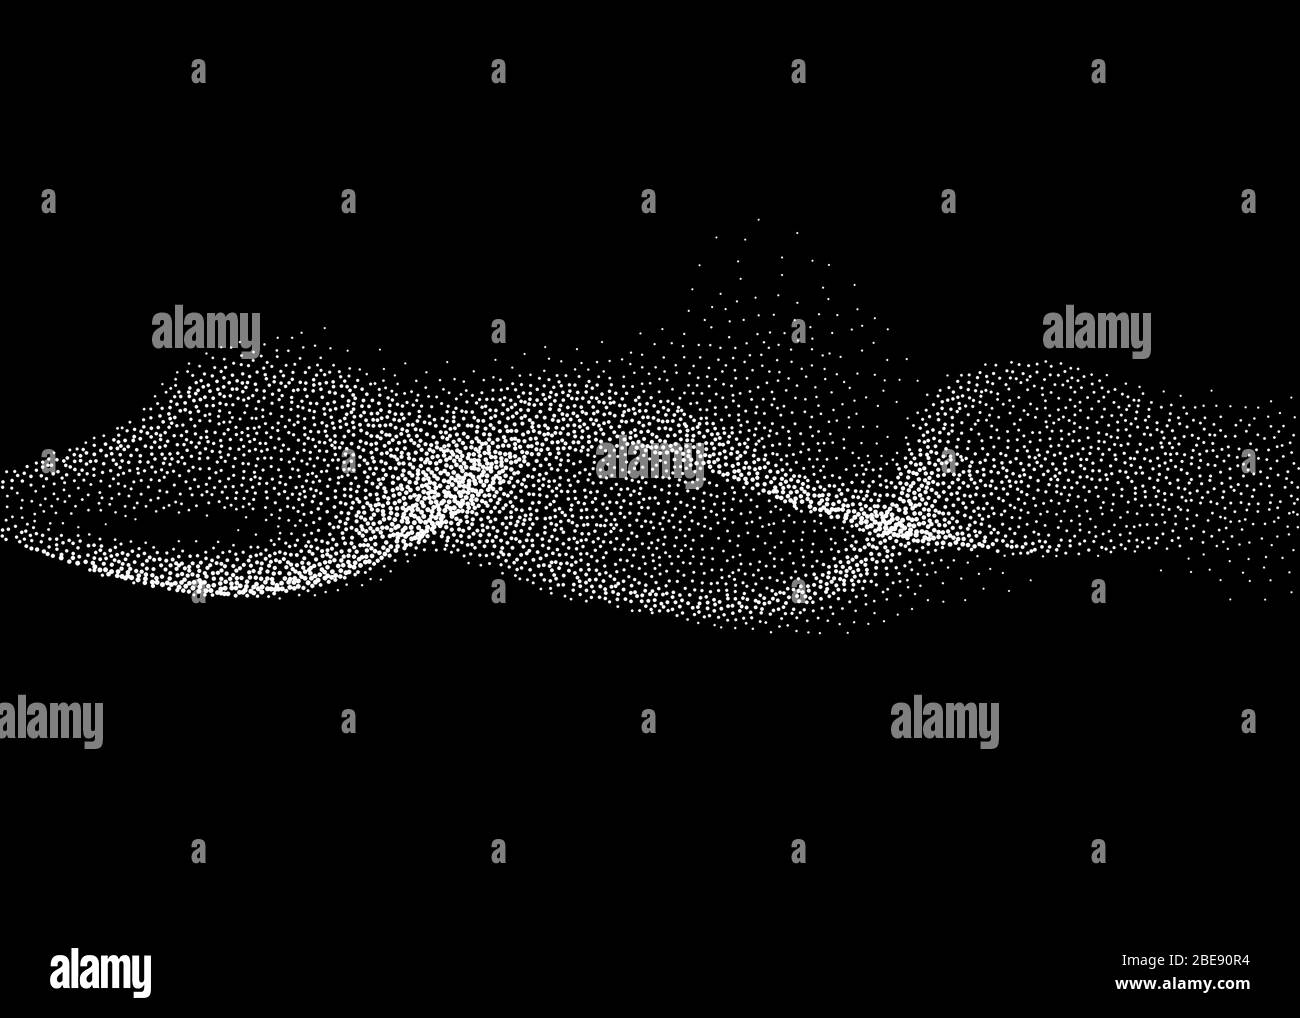 Abstract smokey wave vector background. Nano dynamic flow with 3d particles. Smoky dynamic wavy effect flow illustration Stock Vector